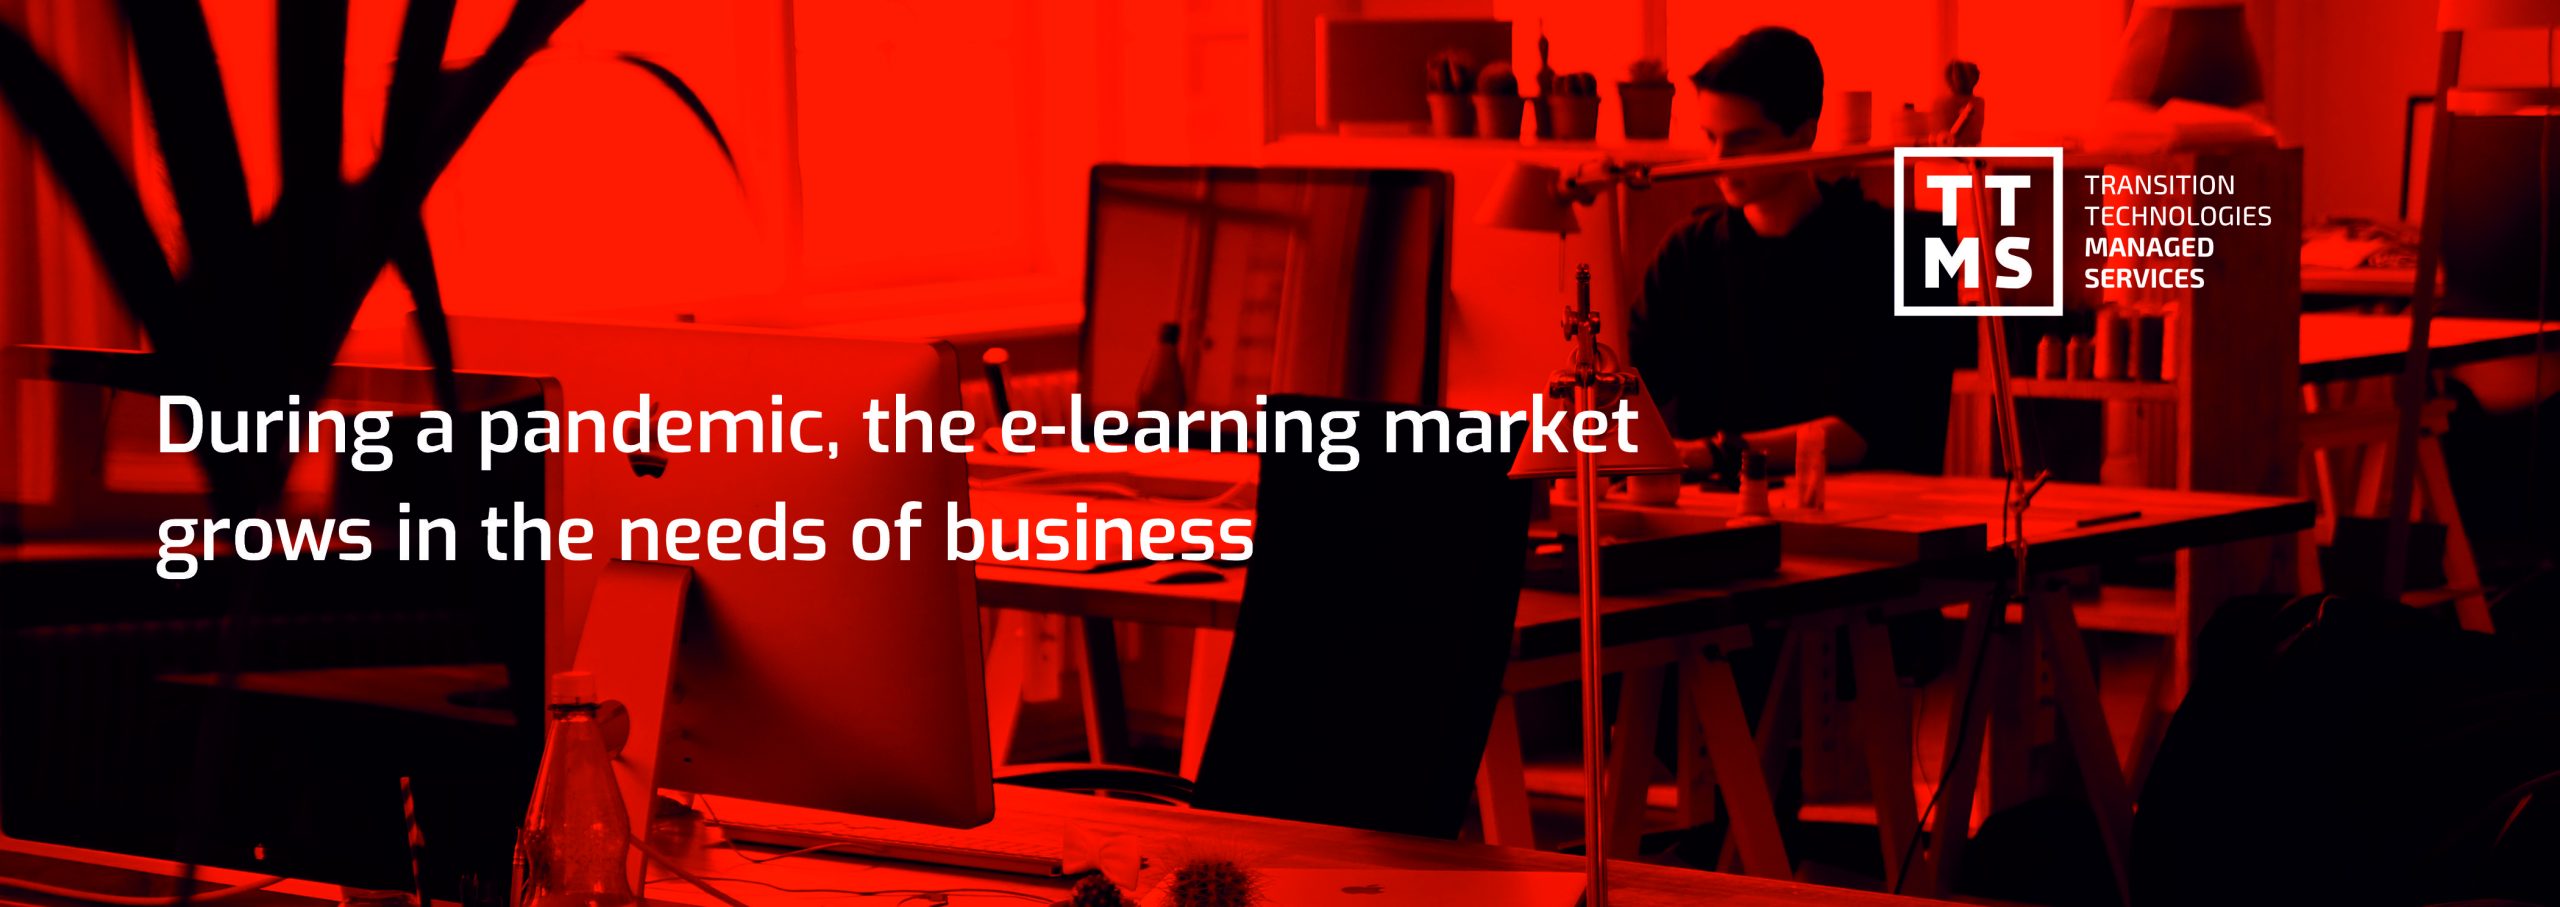 During a pandemic, the e-learning market grows in the needs of business